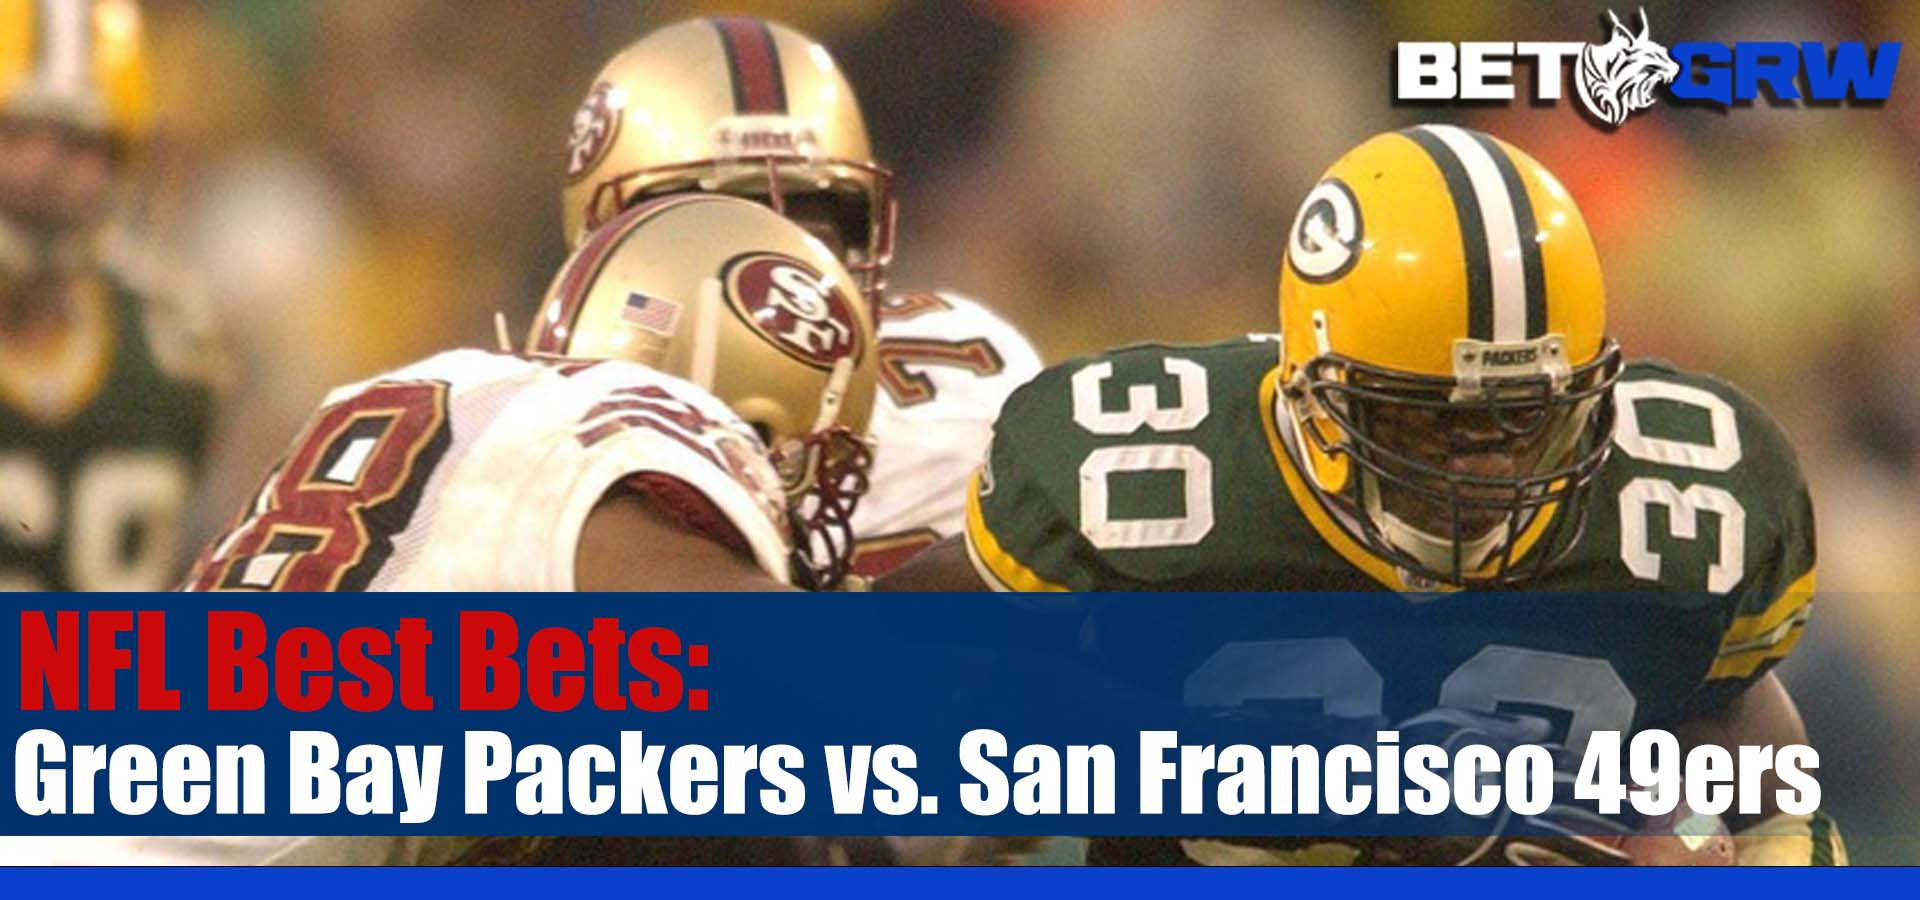 Green Bay Packers vs. San Francisco 49ers NFL NFC Divisional Playoffs